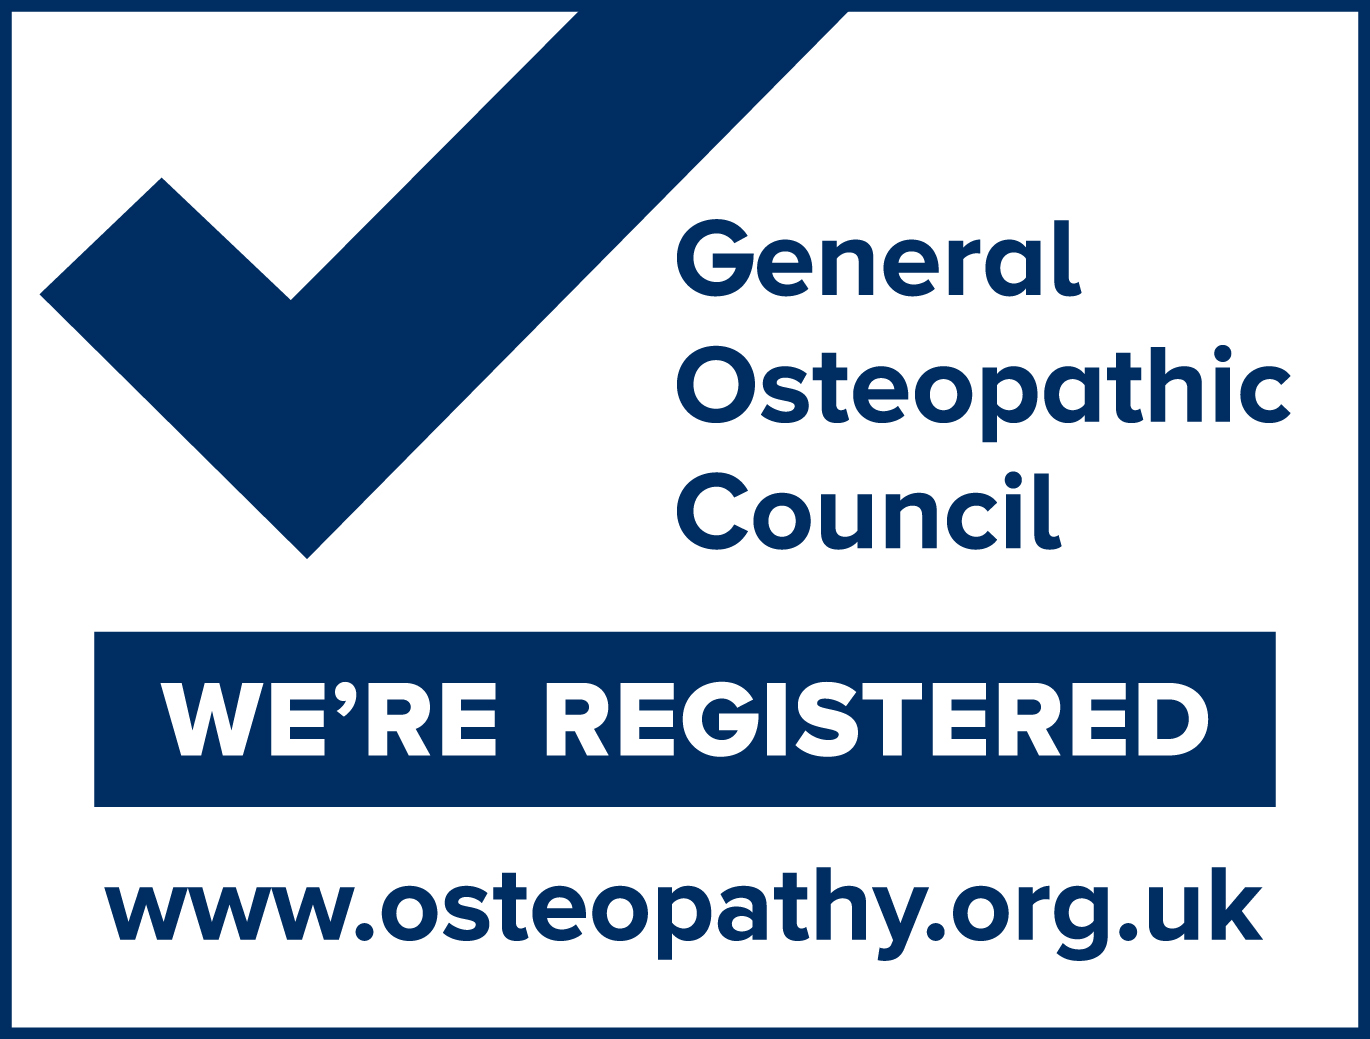 We're registered with the General Osteopathic Council